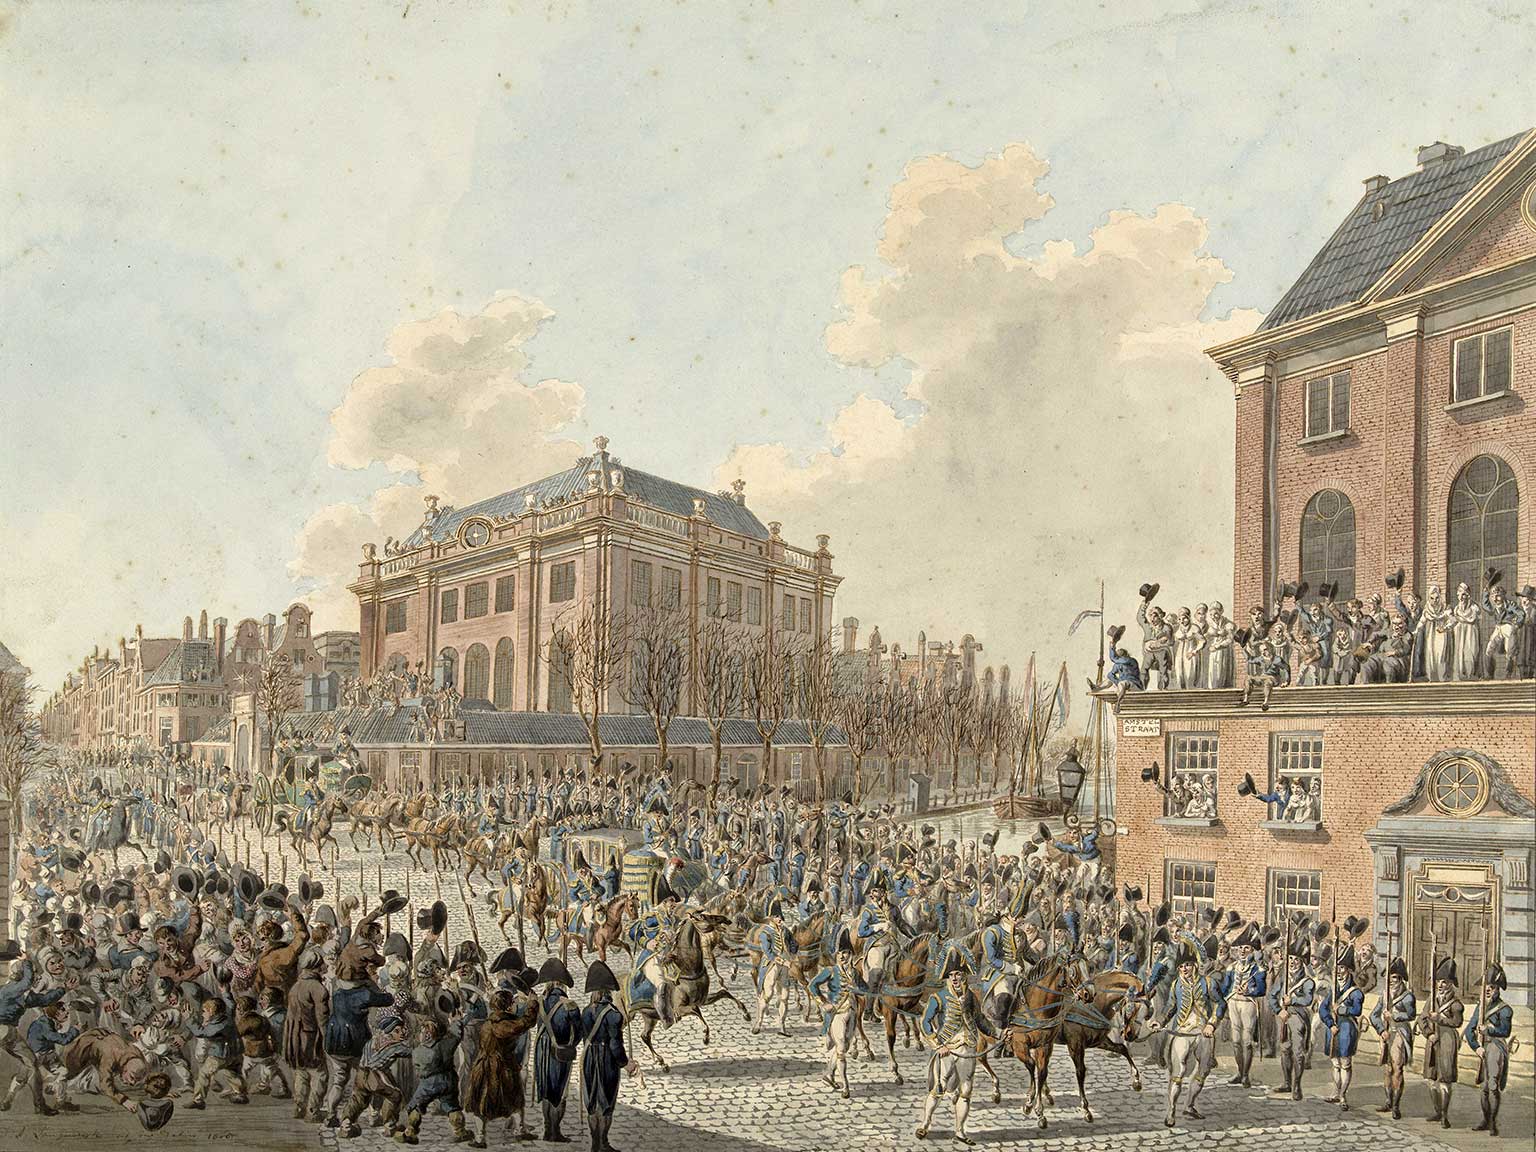 Arrival of King Louis Napoleon in Amsterdam in April 1808, drawing by Jan Anthonie Langendijk